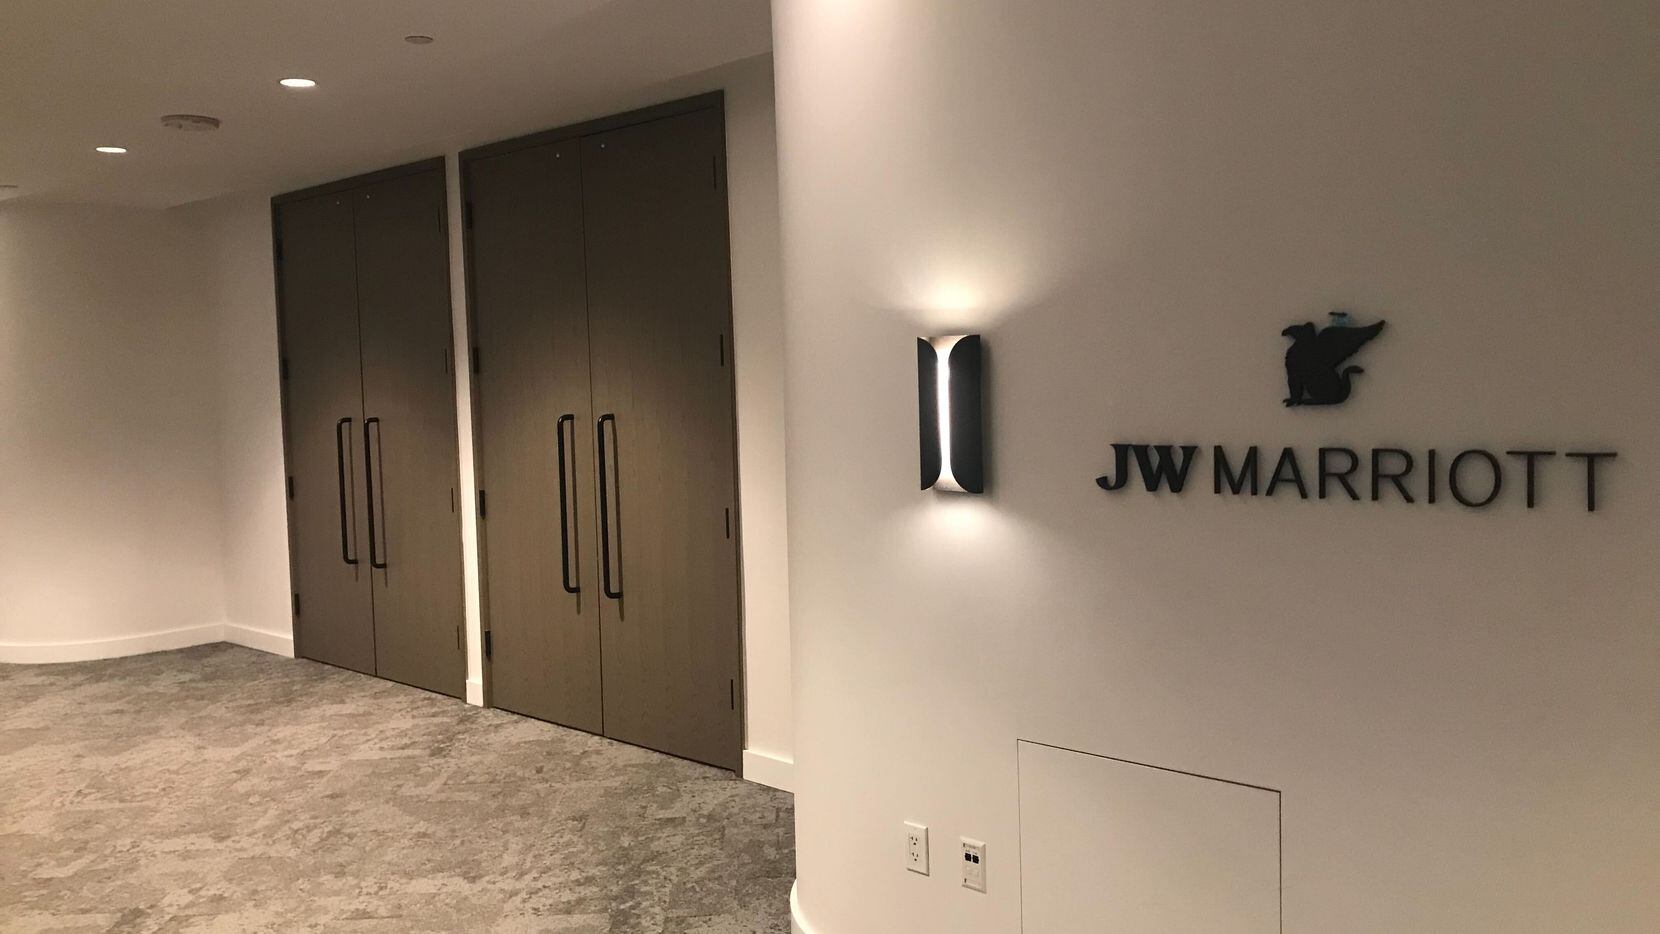 The interior of the JW Marriott.